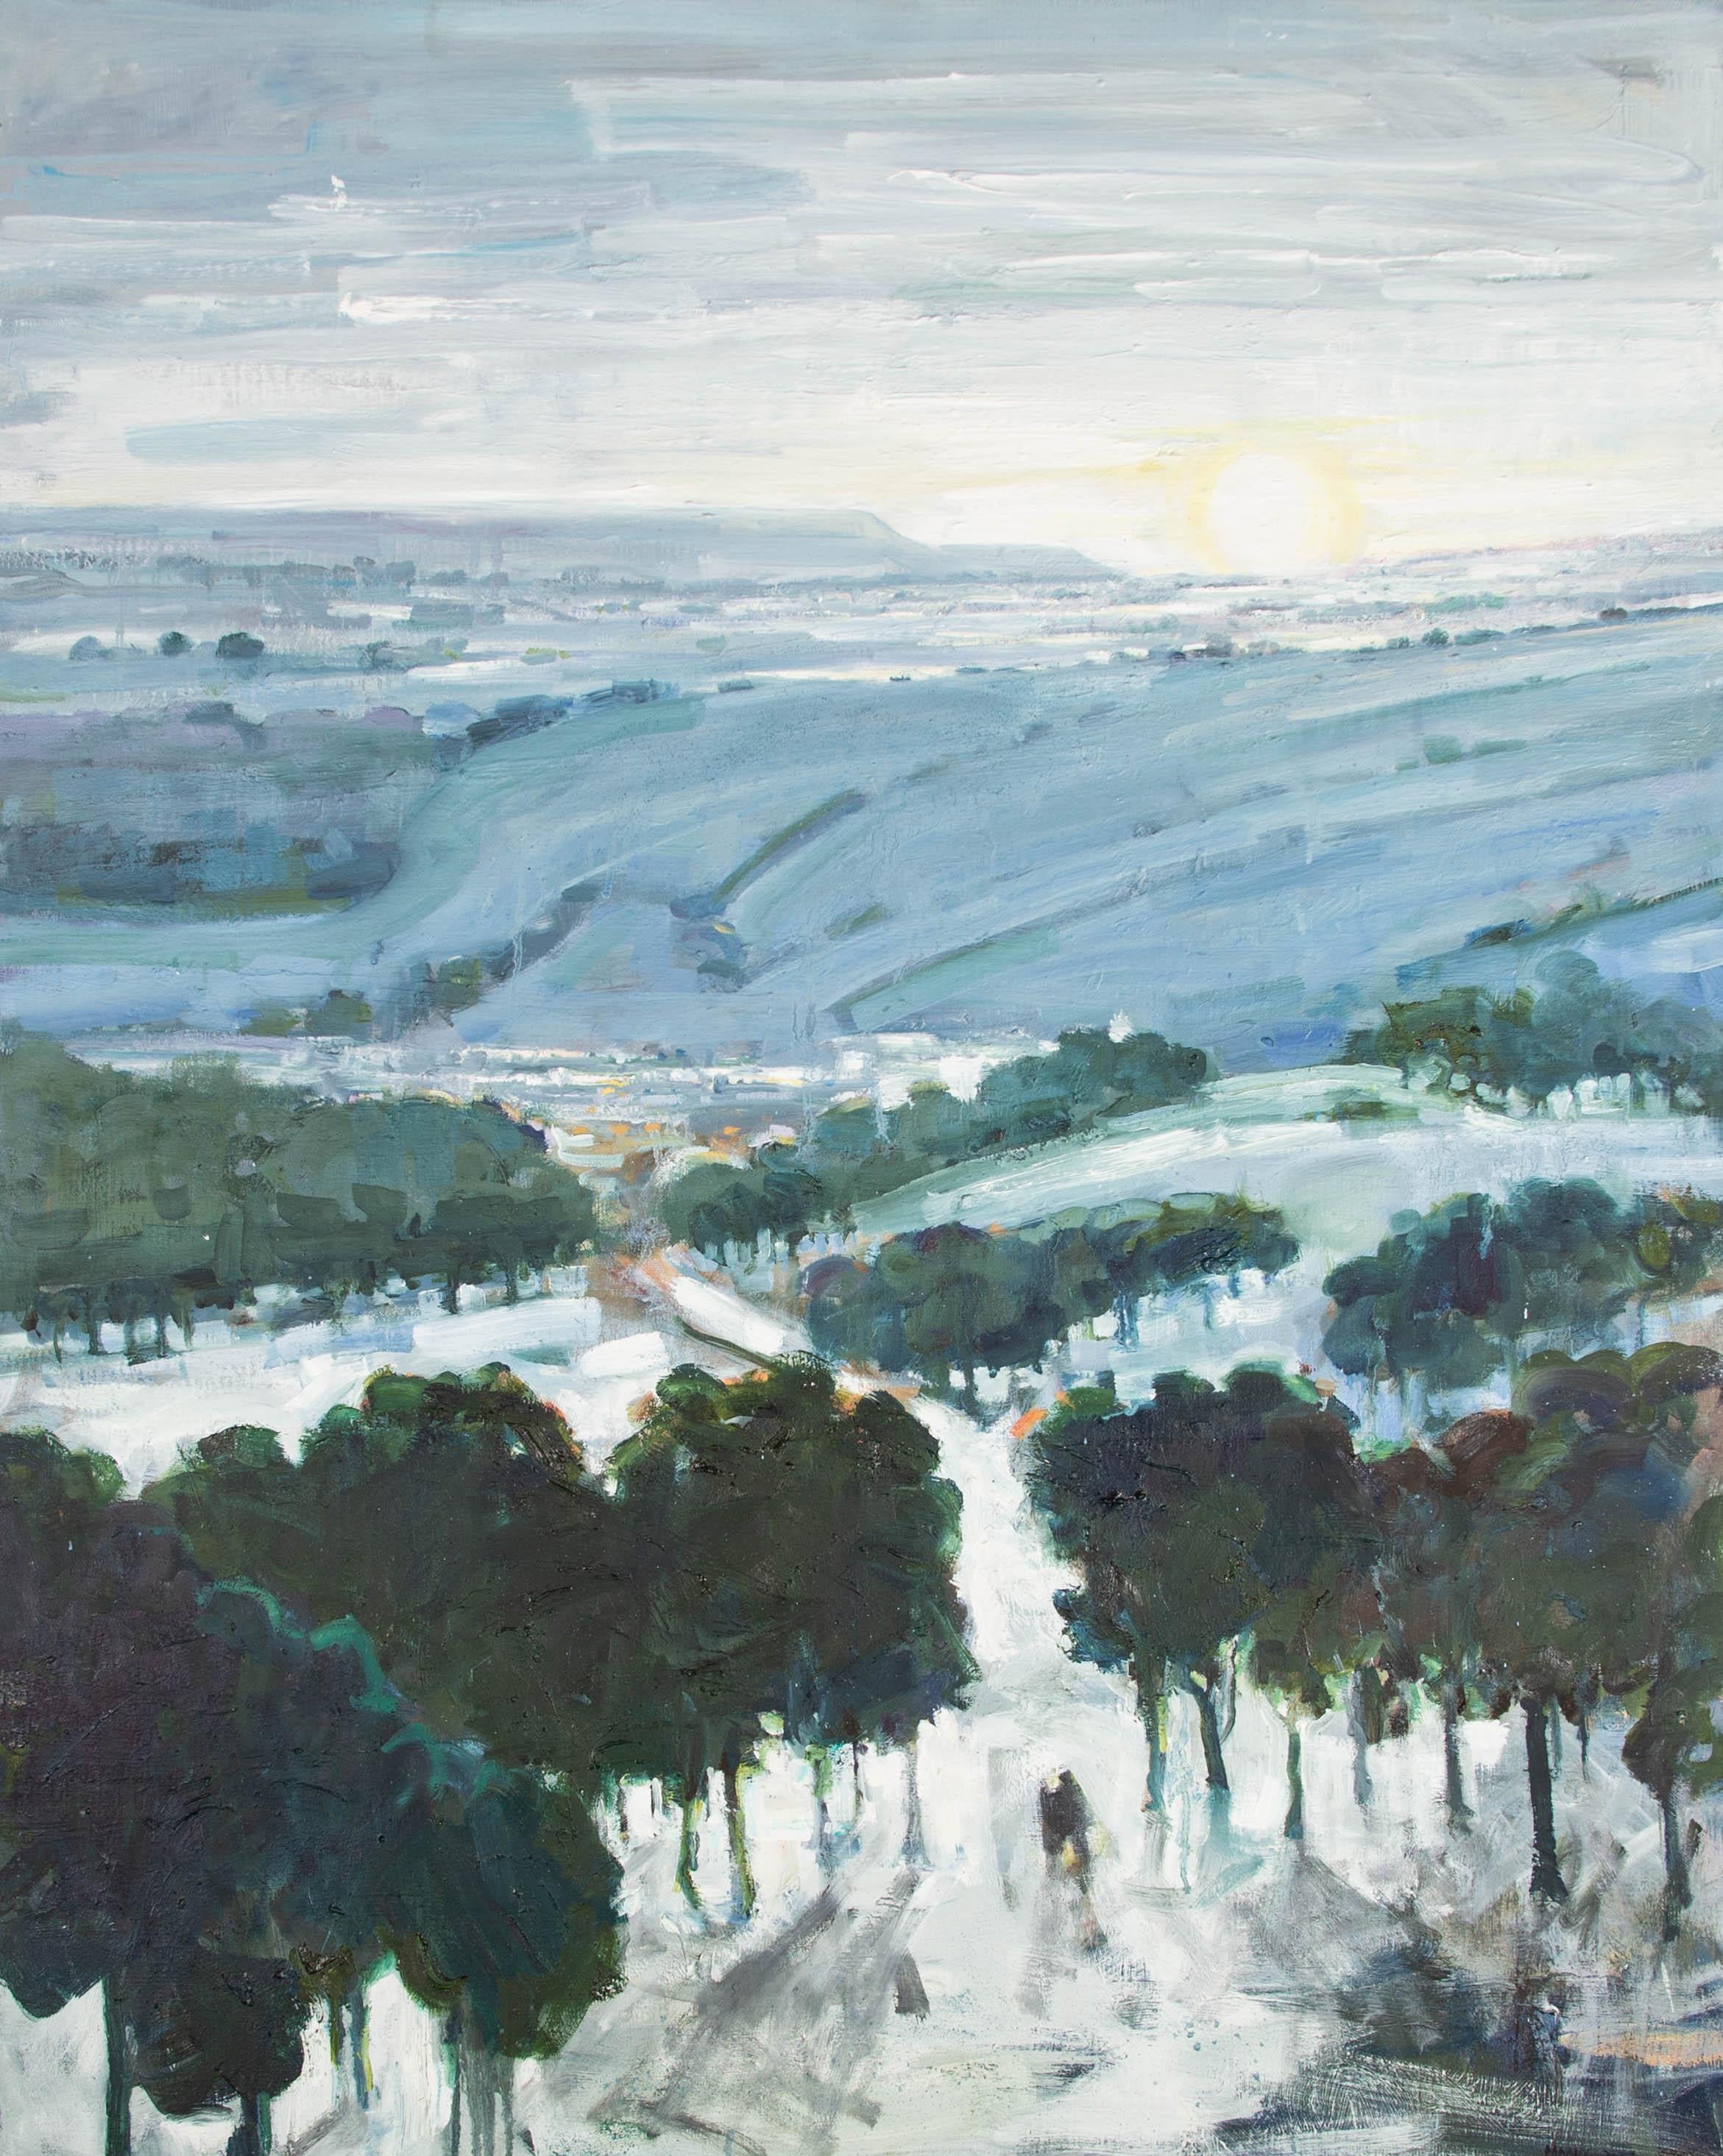 A dynamically textured Winter landscape in oil, showing dark rolling hills and fields in an expansive view at sundown. Two figures can be seen walking through the snow and trees at the lower third. The artist has signed and dated to the lower right